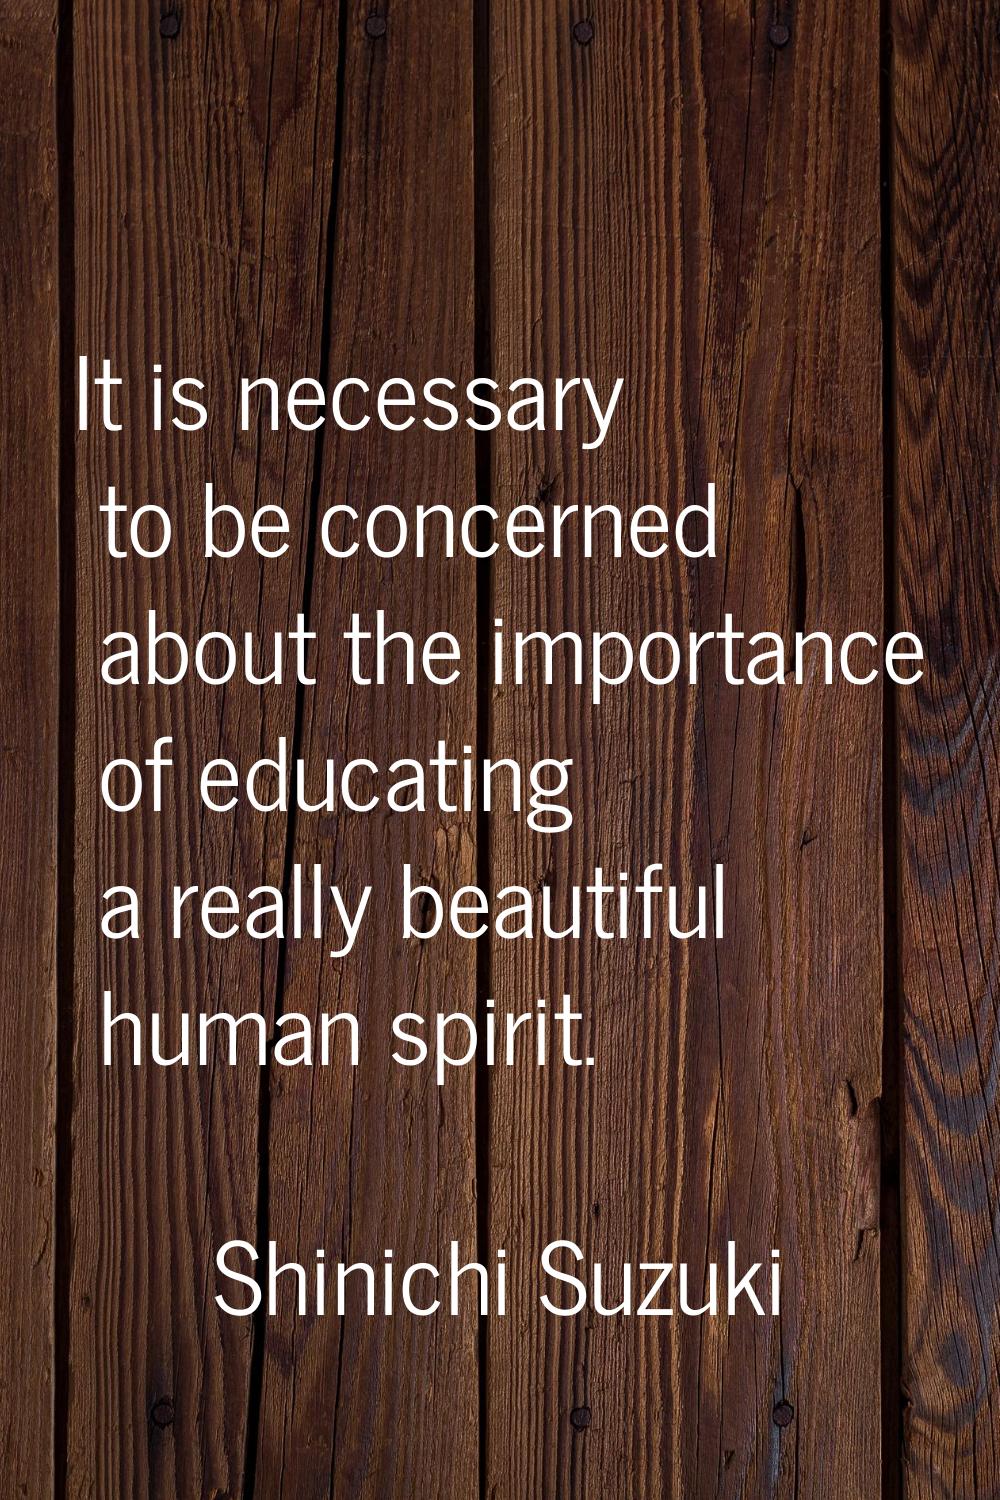 It is necessary to be concerned about the importance of educating a really beautiful human spirit.